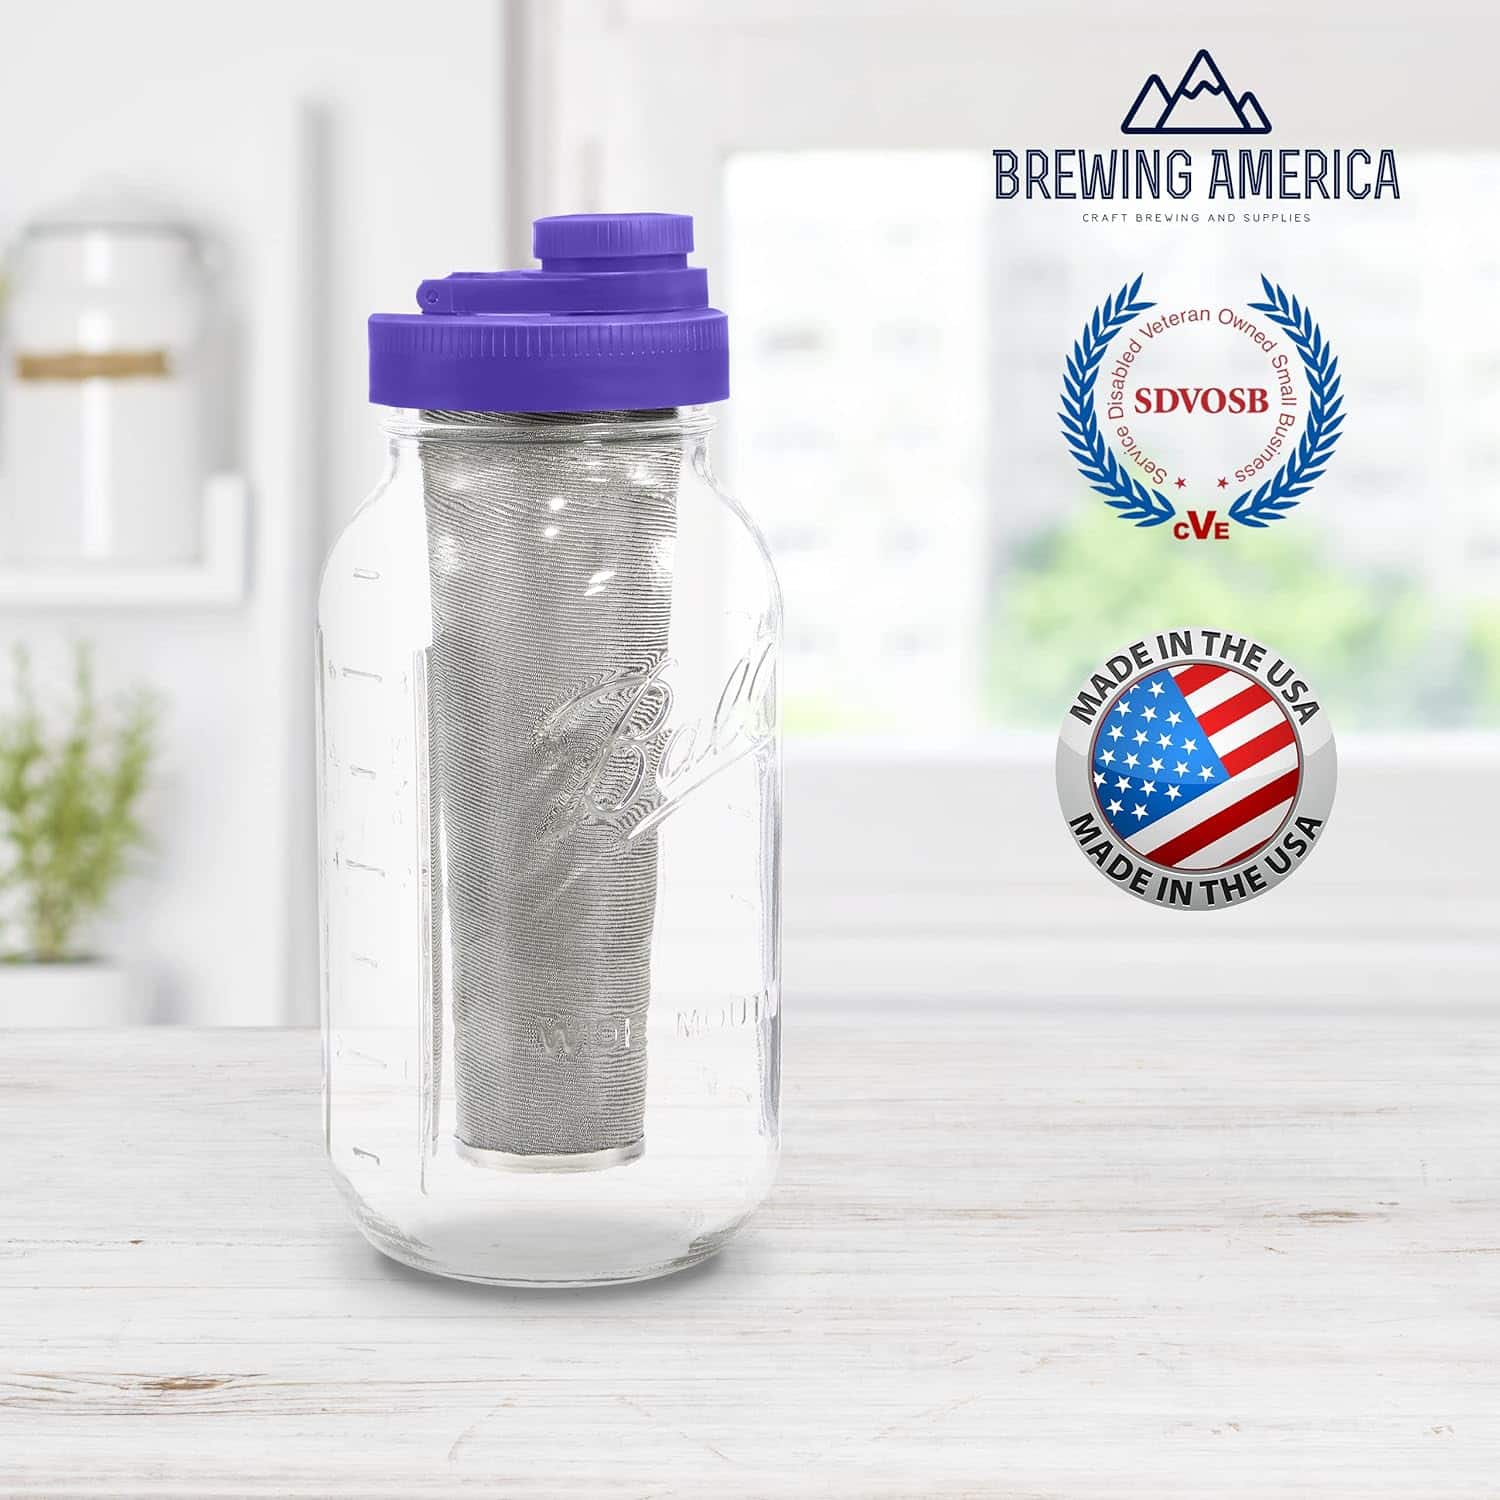 Brewing America Mason Jar Cold Brew Coffee Maker: The Perfect Way to Enjoy Smooth and Flavorful Coffee